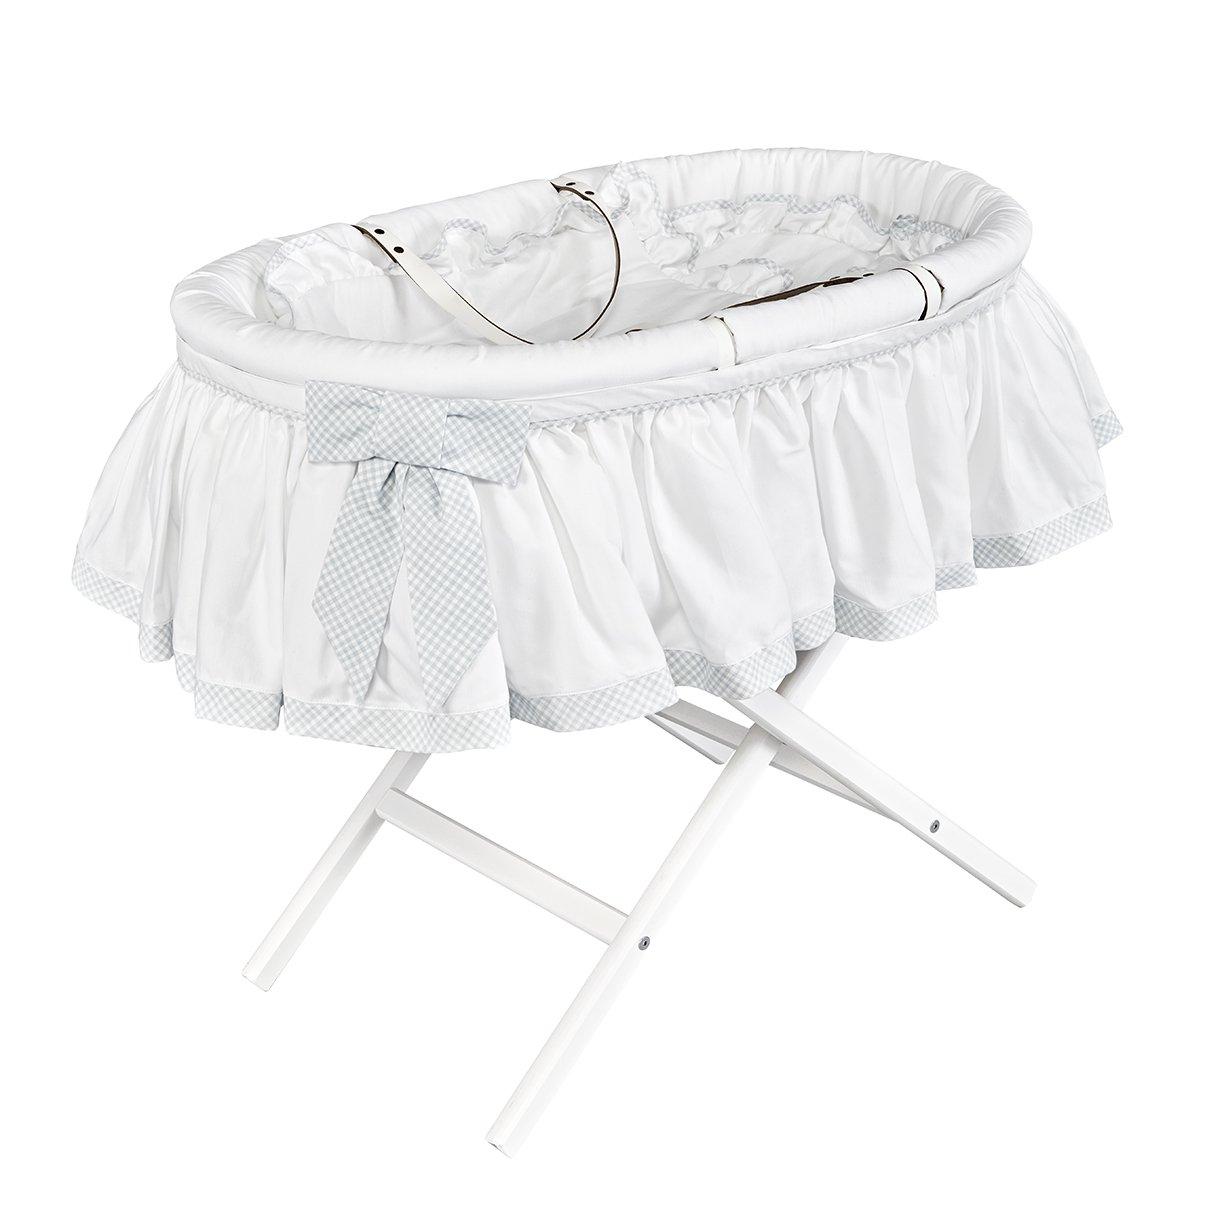 Dragons Moses Basket with a Classic Skirt (stand sold separately)